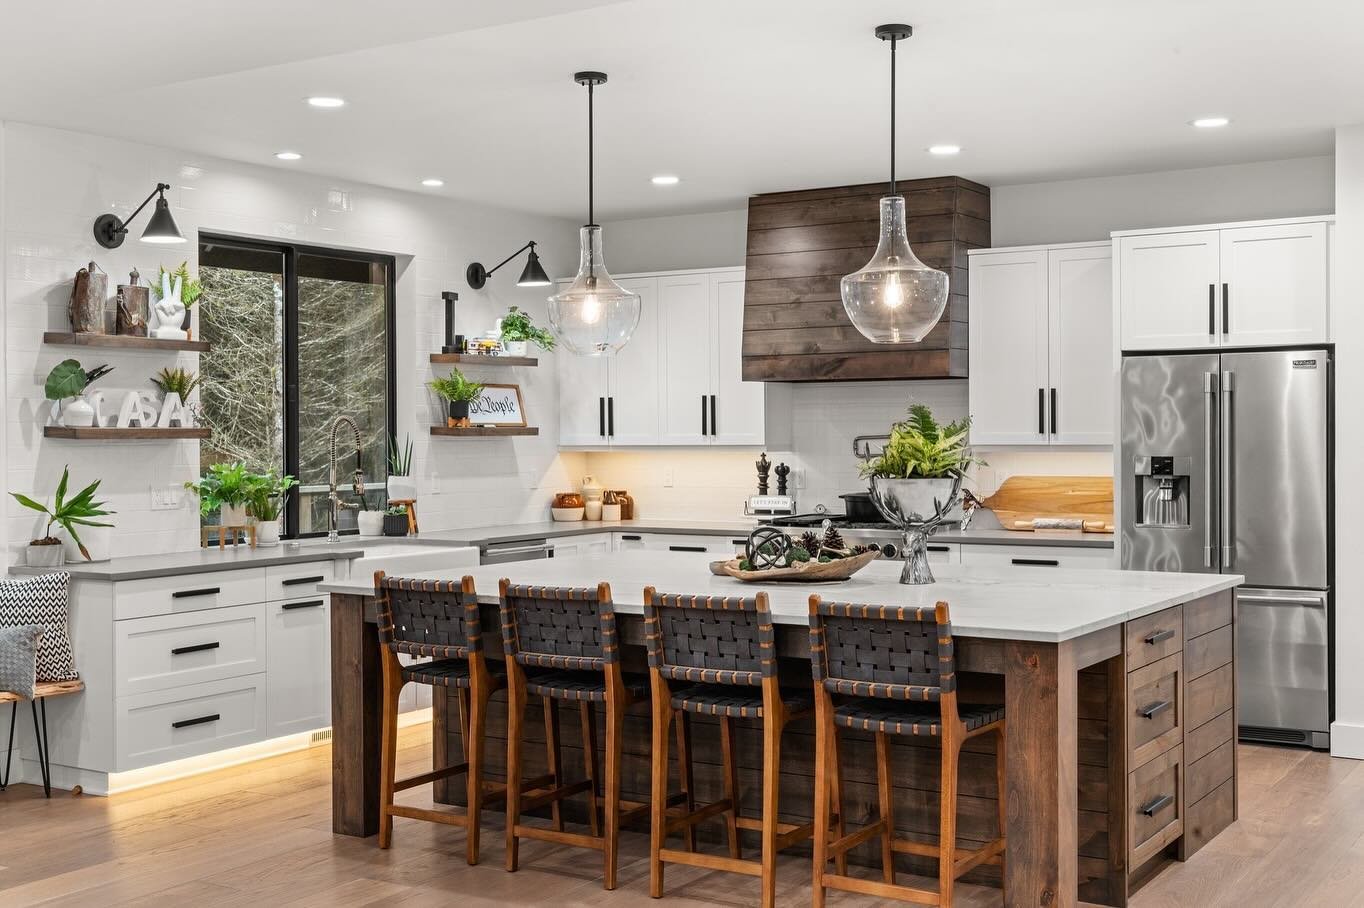 We love the look of this kitchen! 🤩 Such a great mix of textures, tones, and style! The layout and touch of style in this home is stunning! 

⭐️🫵🏼Your Top Requested Real Estate Media Team 🎥 

➡️ Follow ➡️ @luminate__media 

🫴🏼WE OFFER: 

📷 Hig